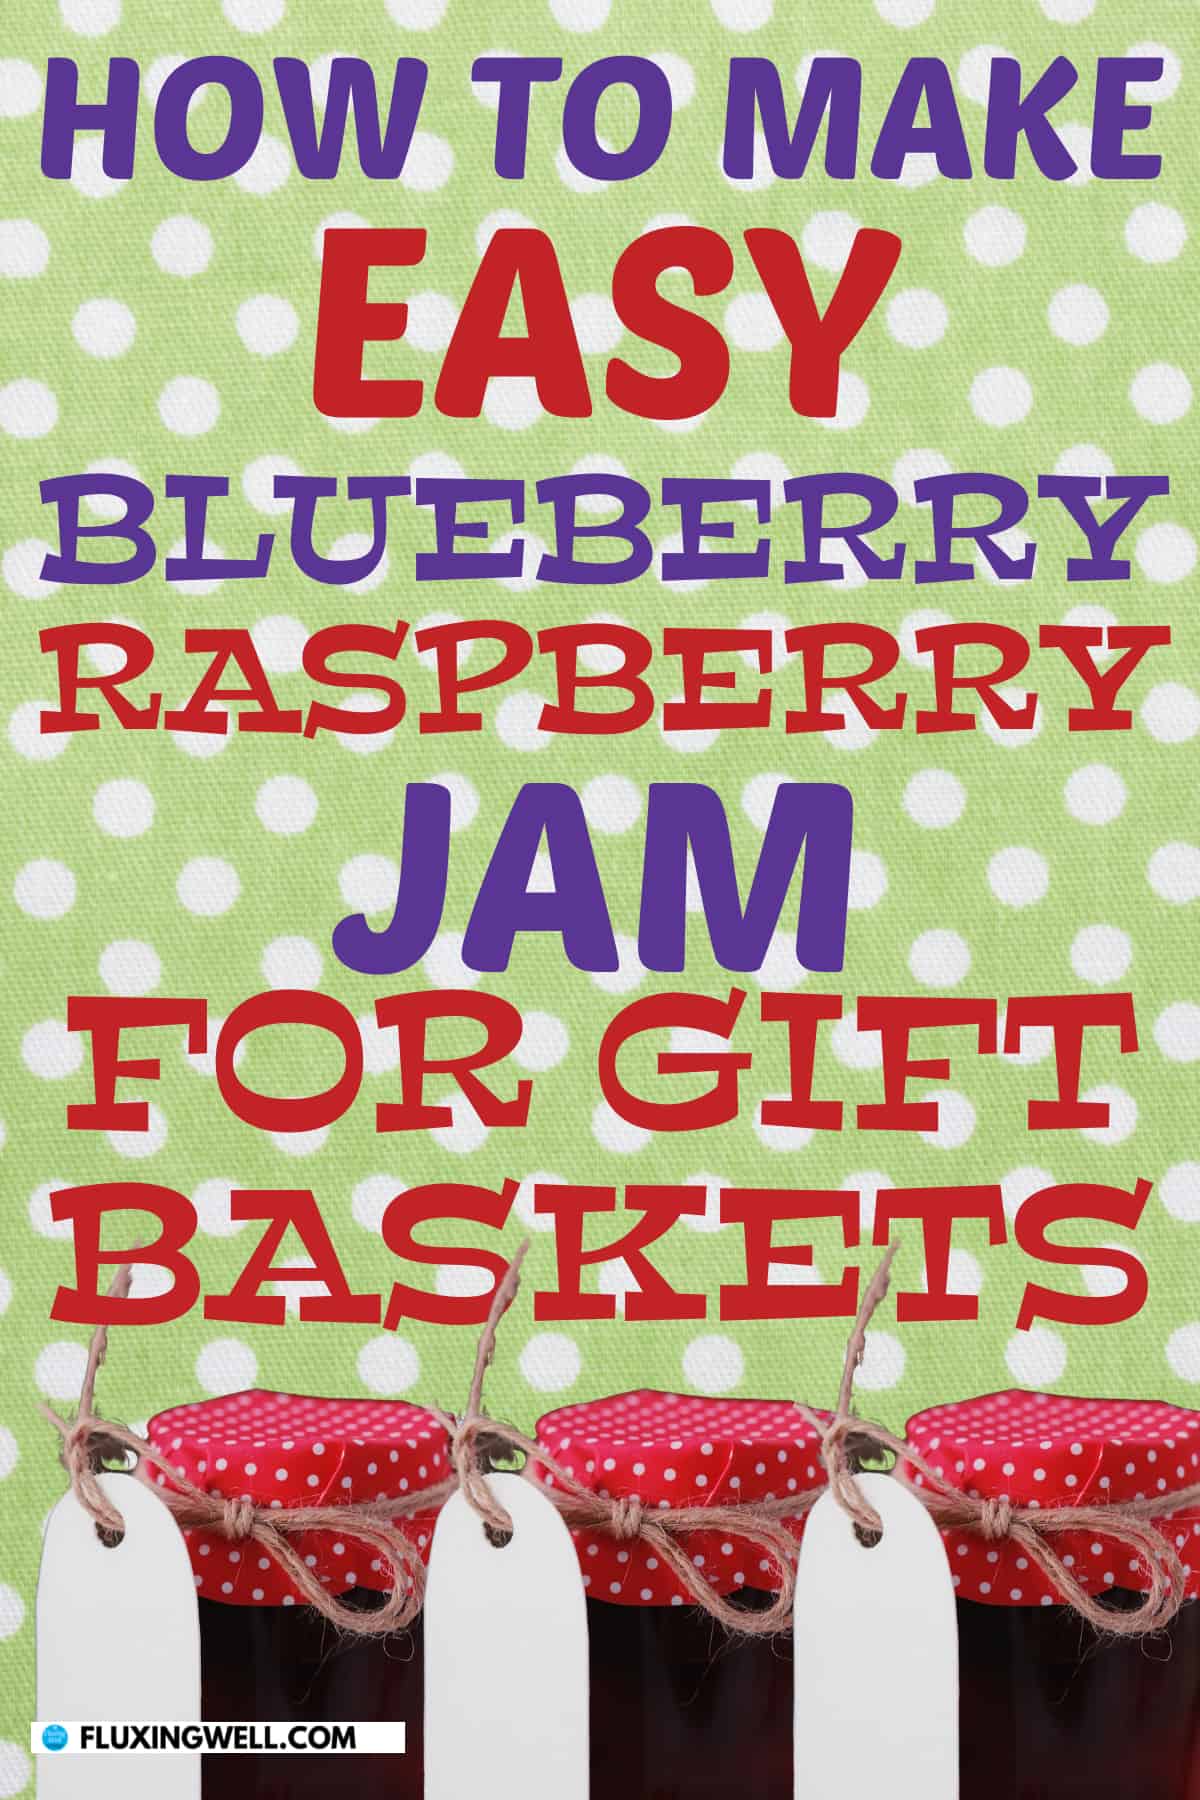 Easy Raspberry Blueberry Jam queens jam recipe for gifts in jars